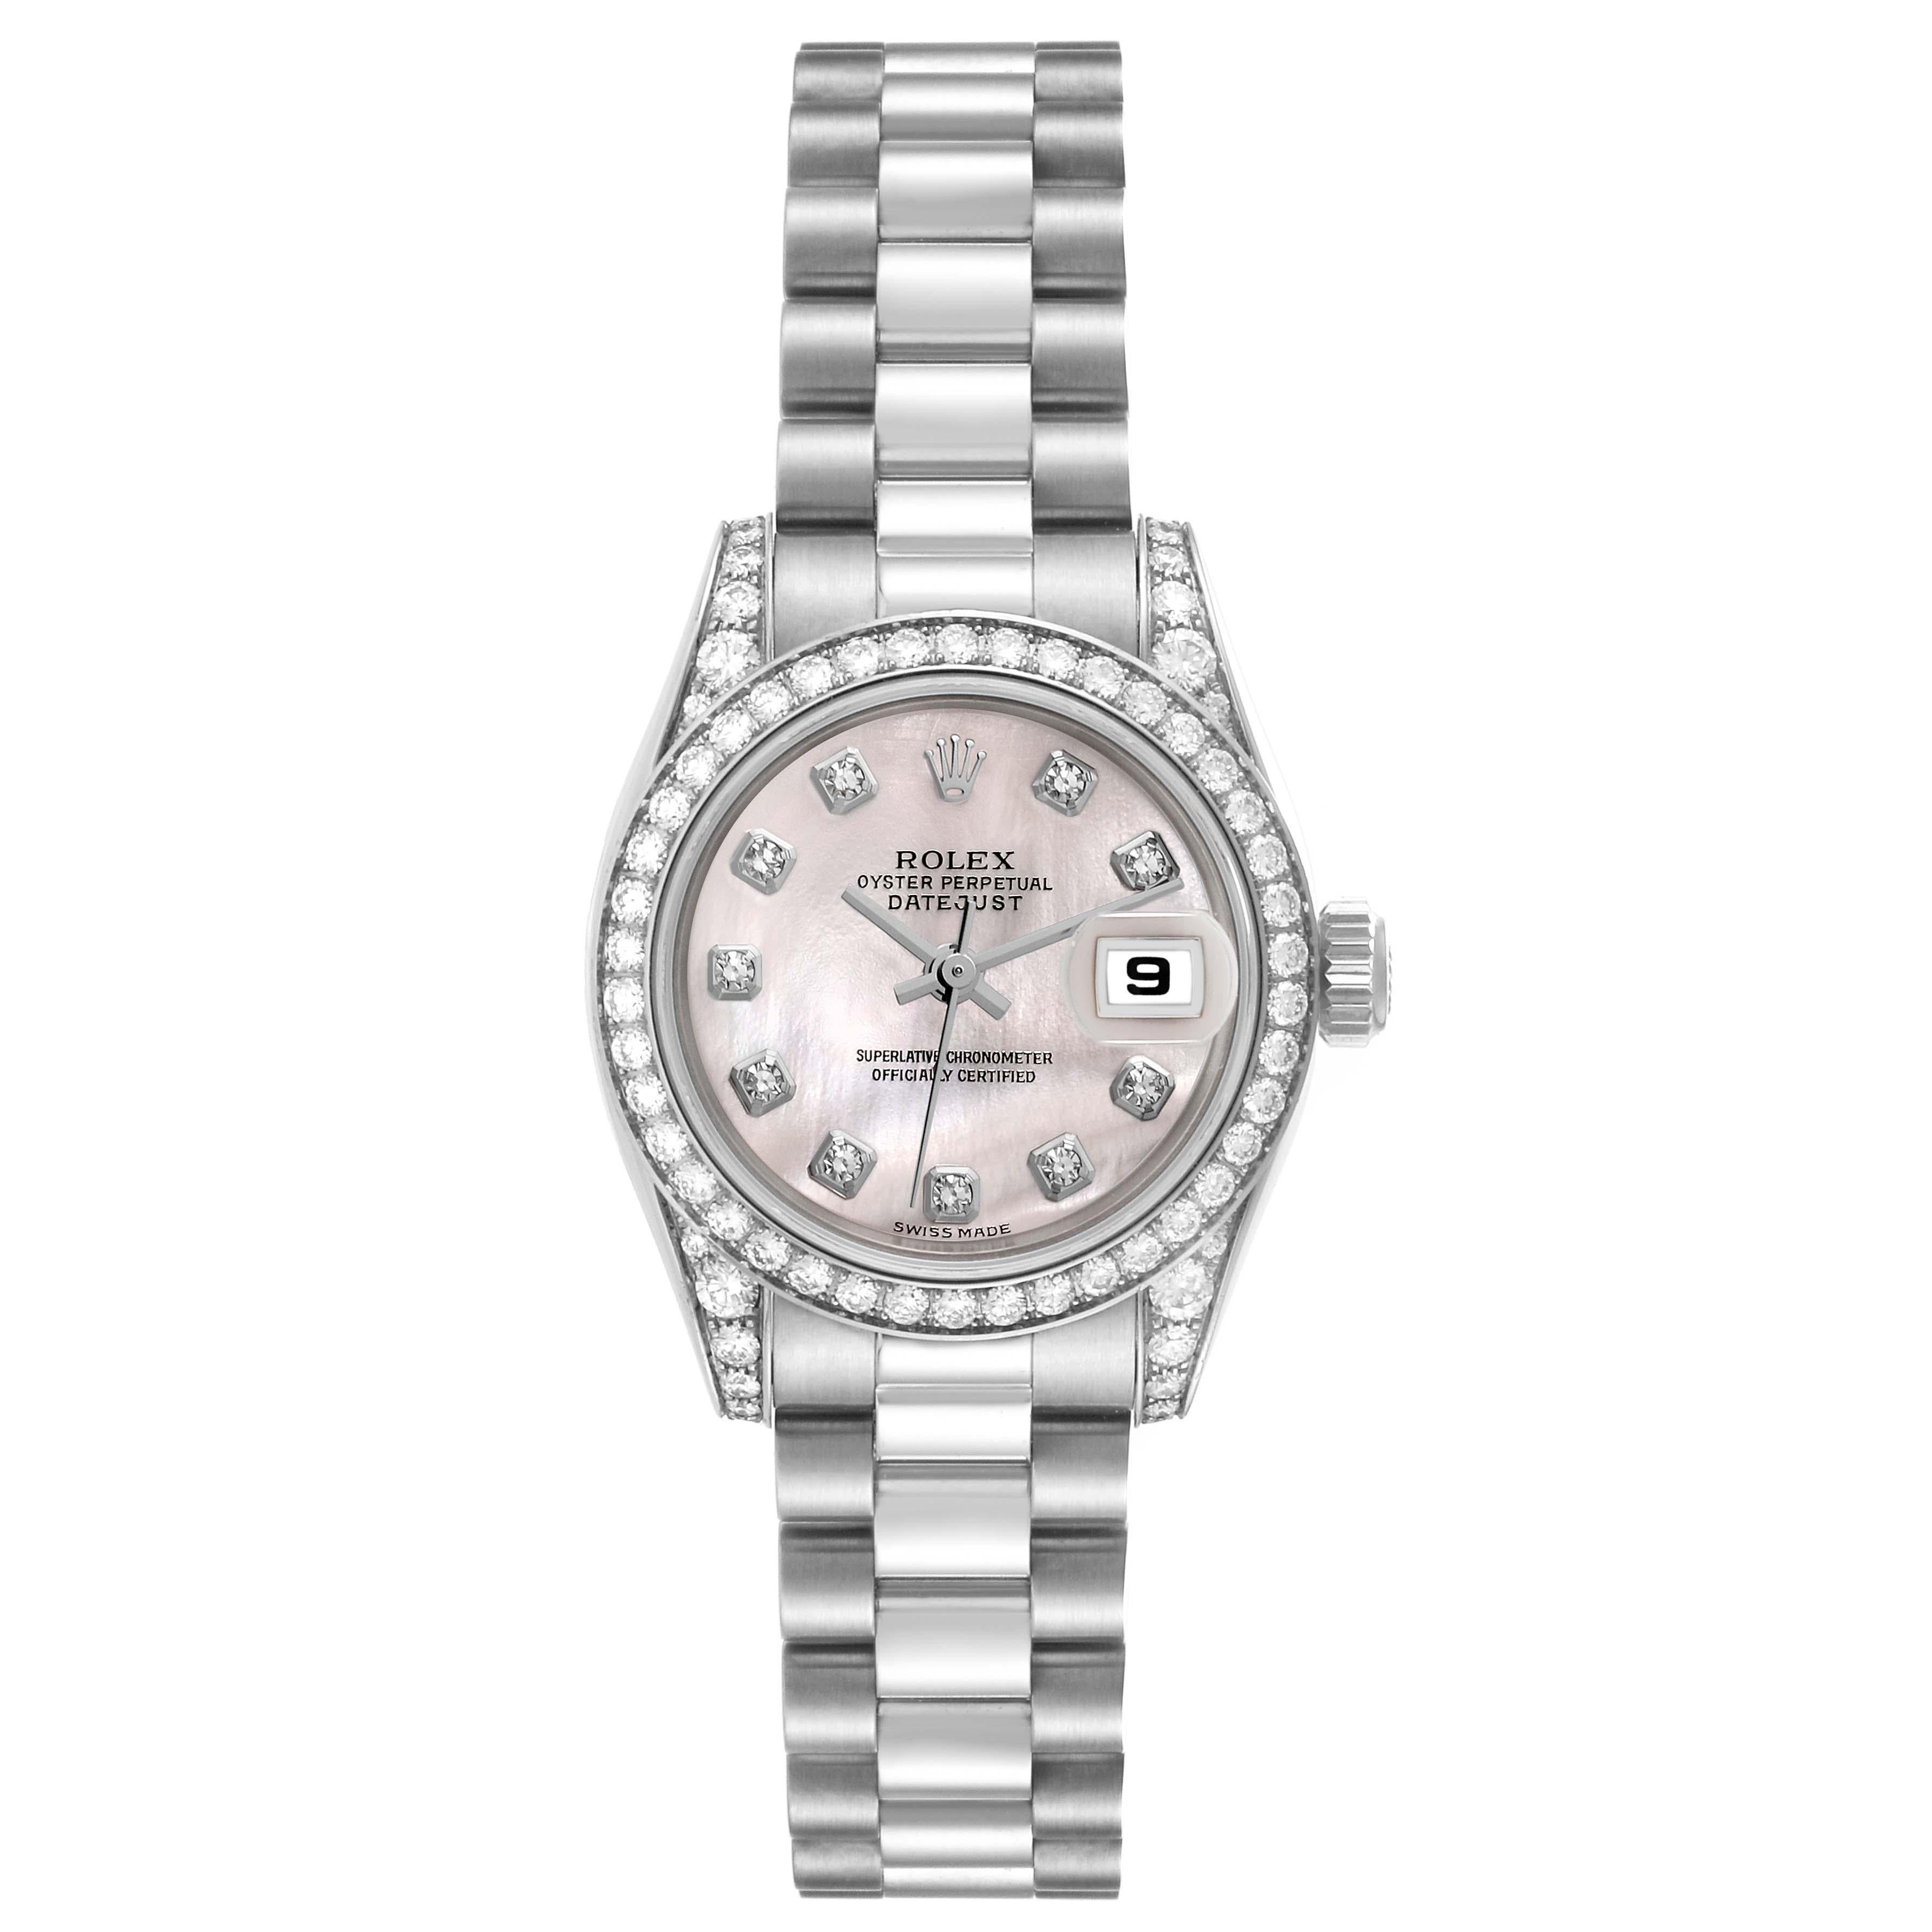 Rolex Datejust President White Gold Mother of Pearl Dial Diamond Watch 179159 For Sale 7